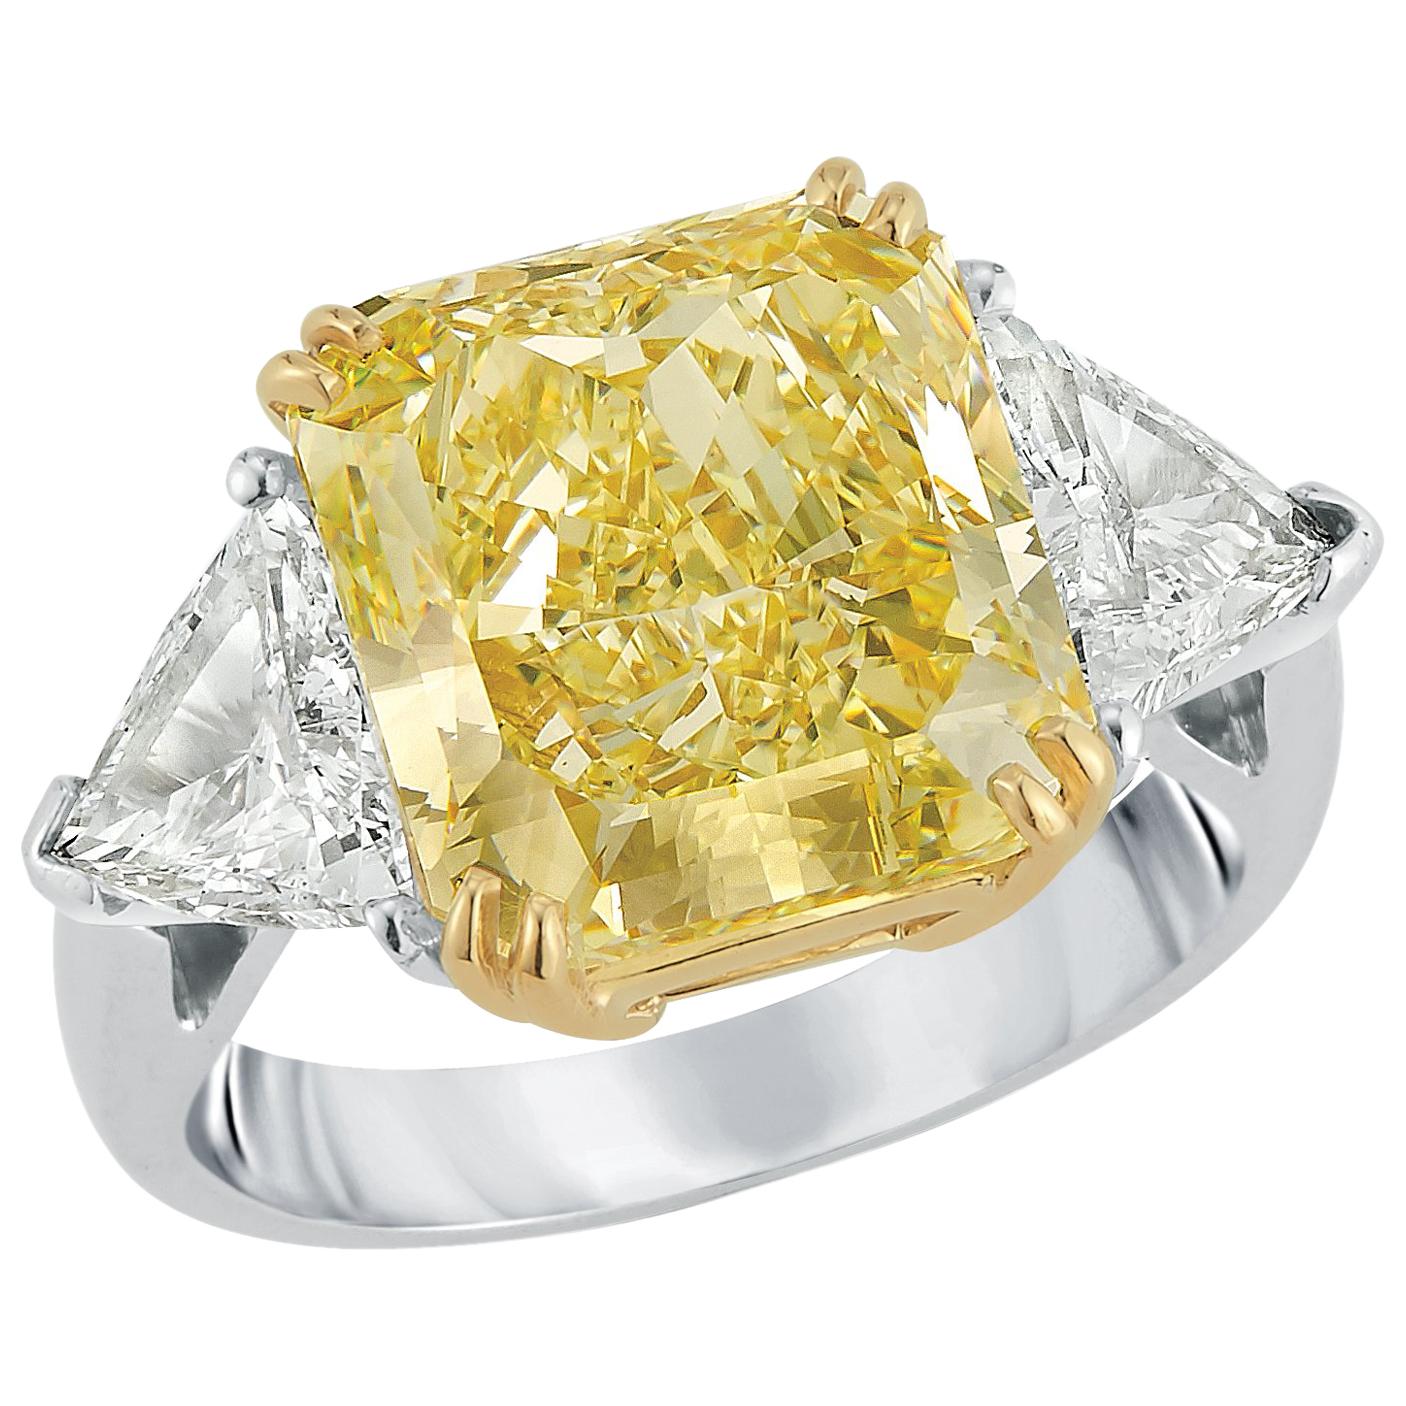 Magnificent Fancy Yellow 7.49 Carat Cushion Cut Diamond Engagement Ring For Sale